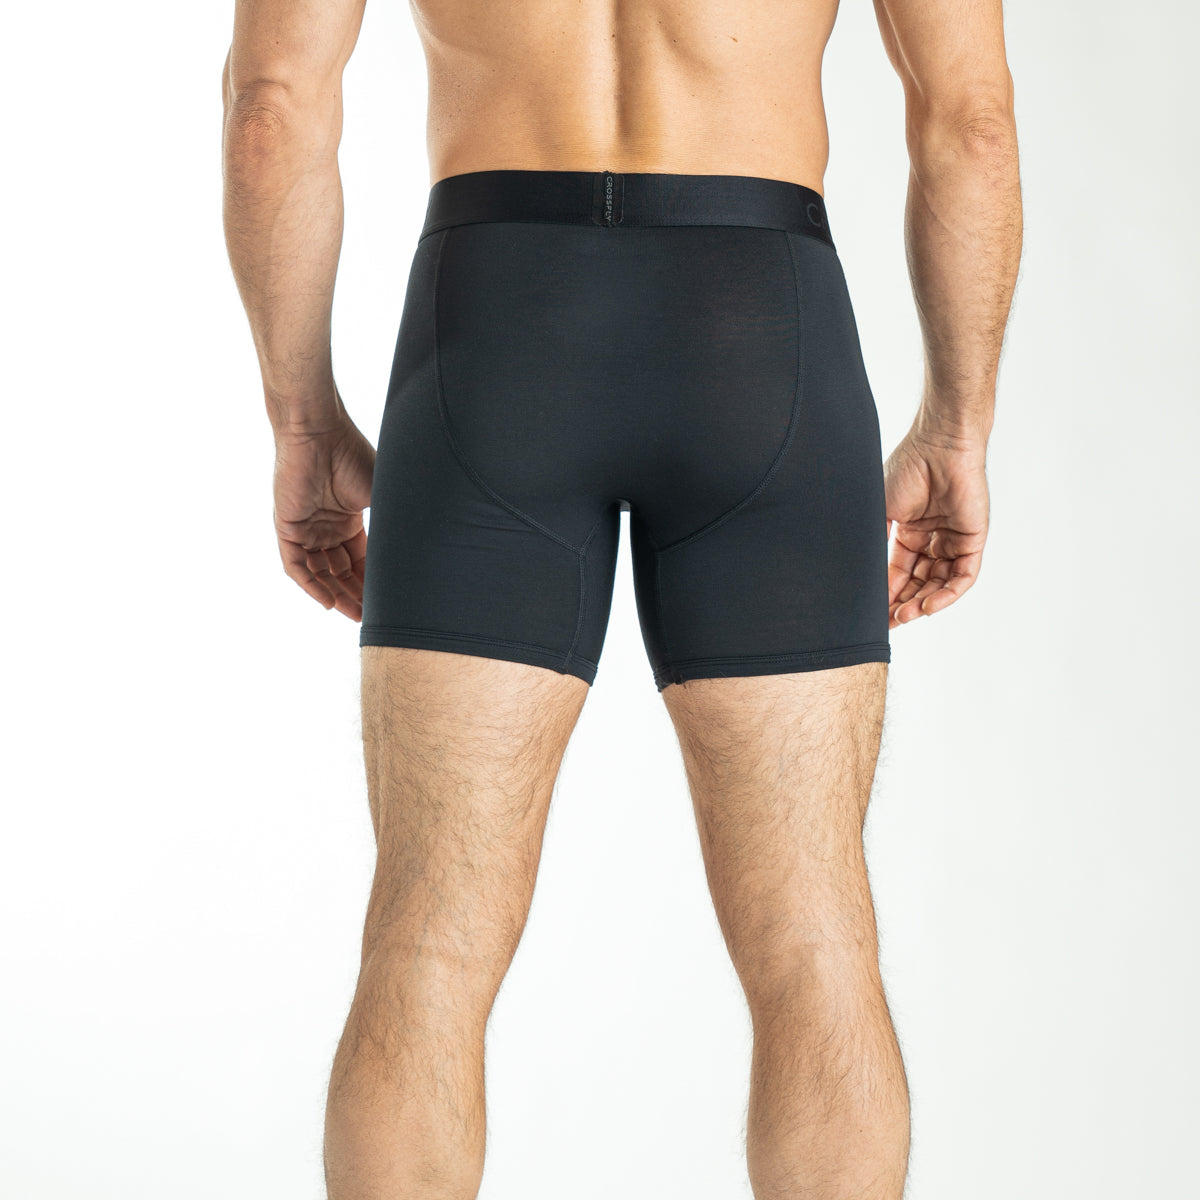 Model wear the Crossfly IKON 6" Boxer in Black. Photo is of back of model showing the back section of Crossfly IKON 6" Boxers in black.